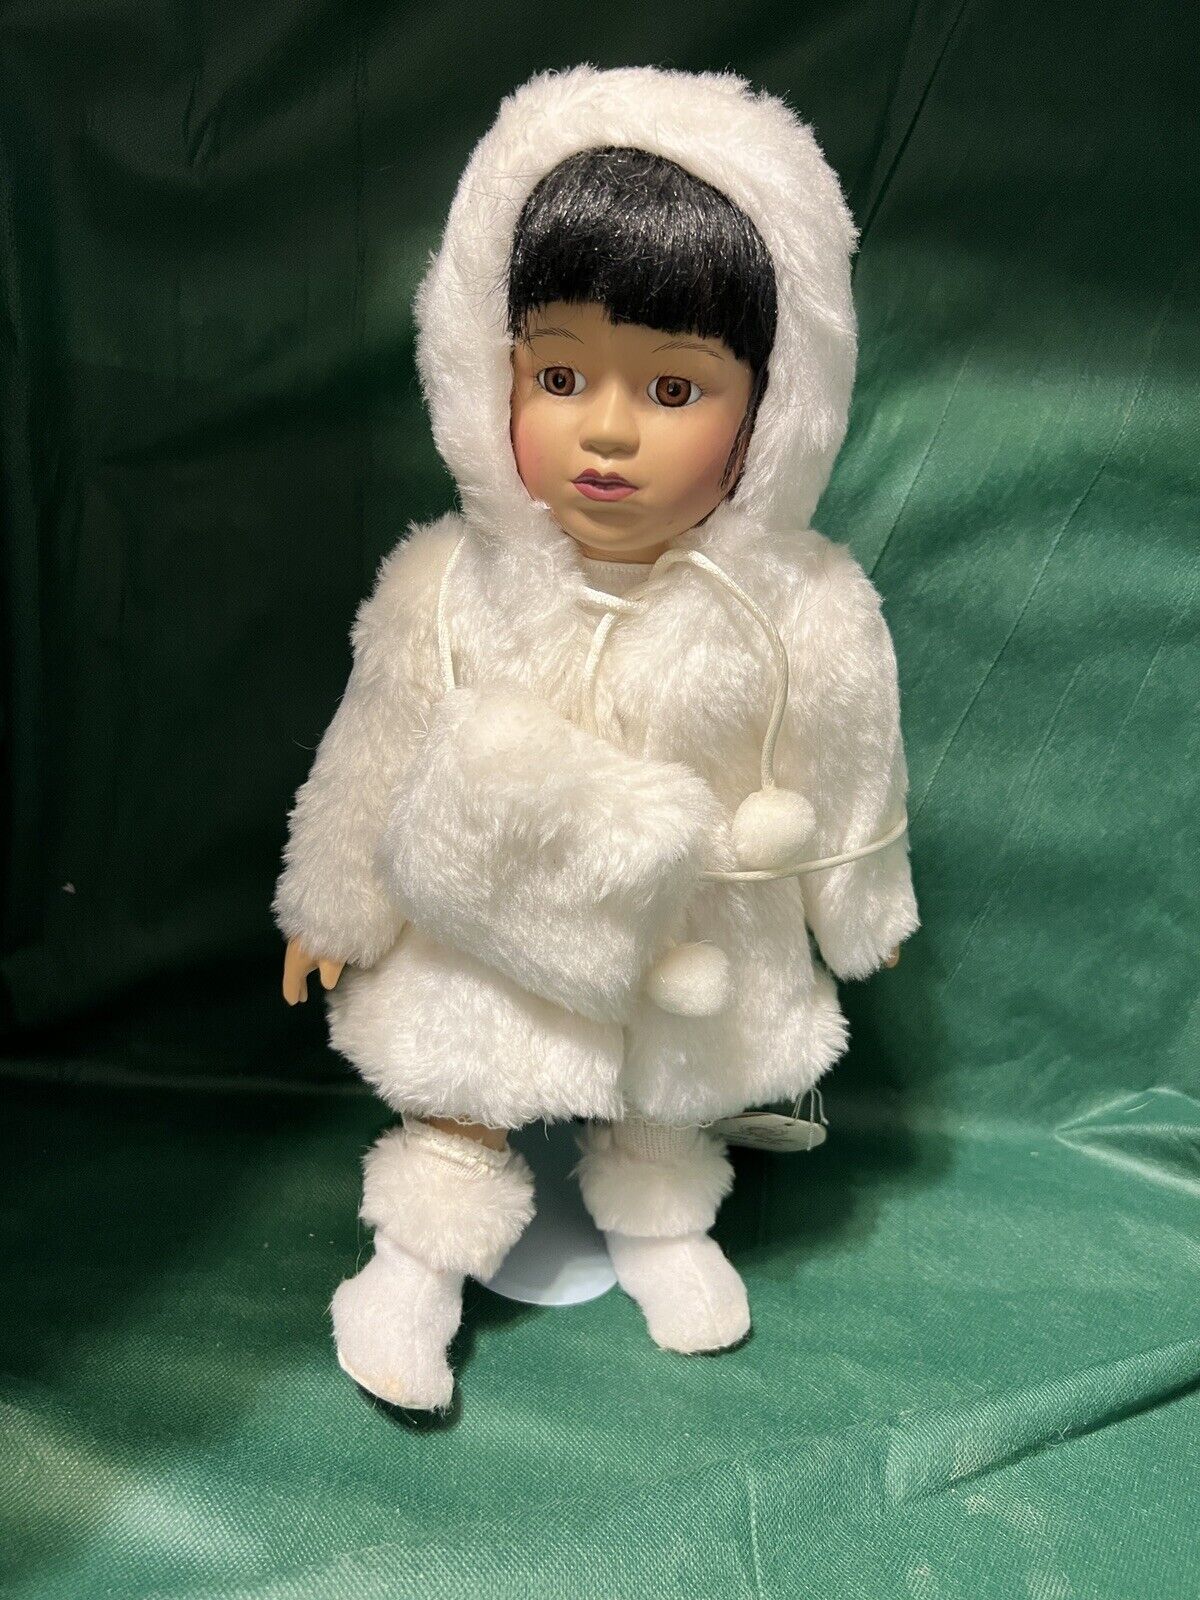 Vintage Snow baby Figurine. New with Tag. Perfect for Holiday or everyday decor